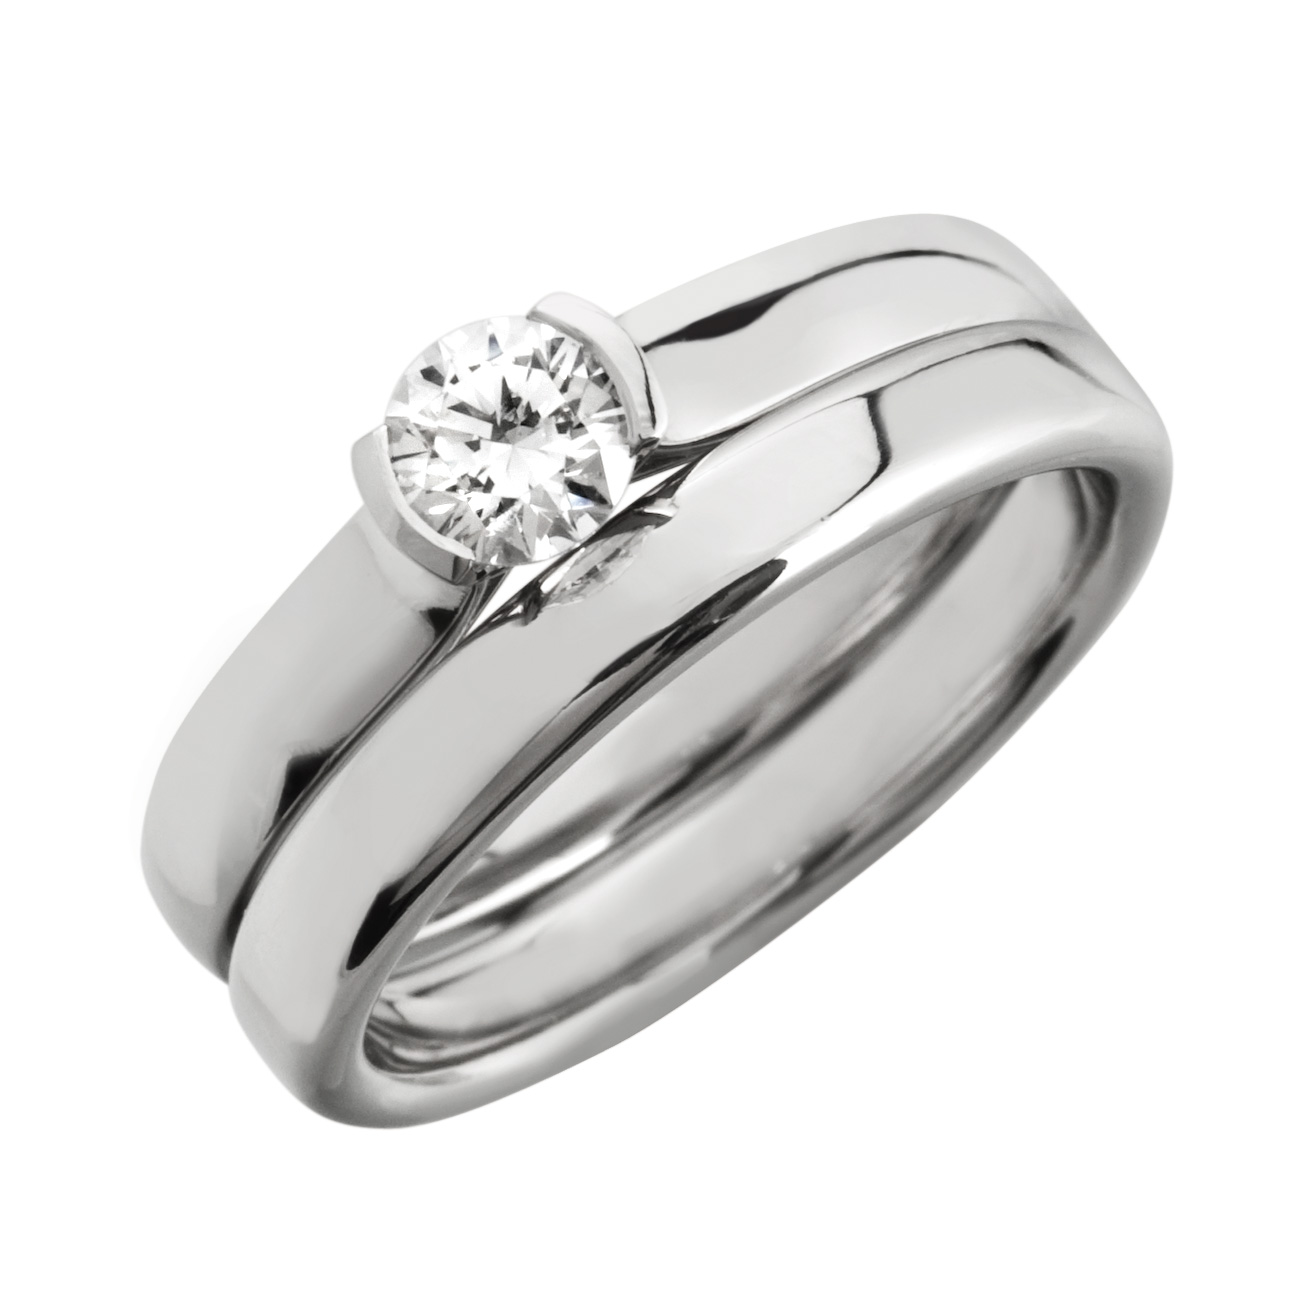 Diamonds and Rings the Online Jeweller Launches a New Range of Bridal ...